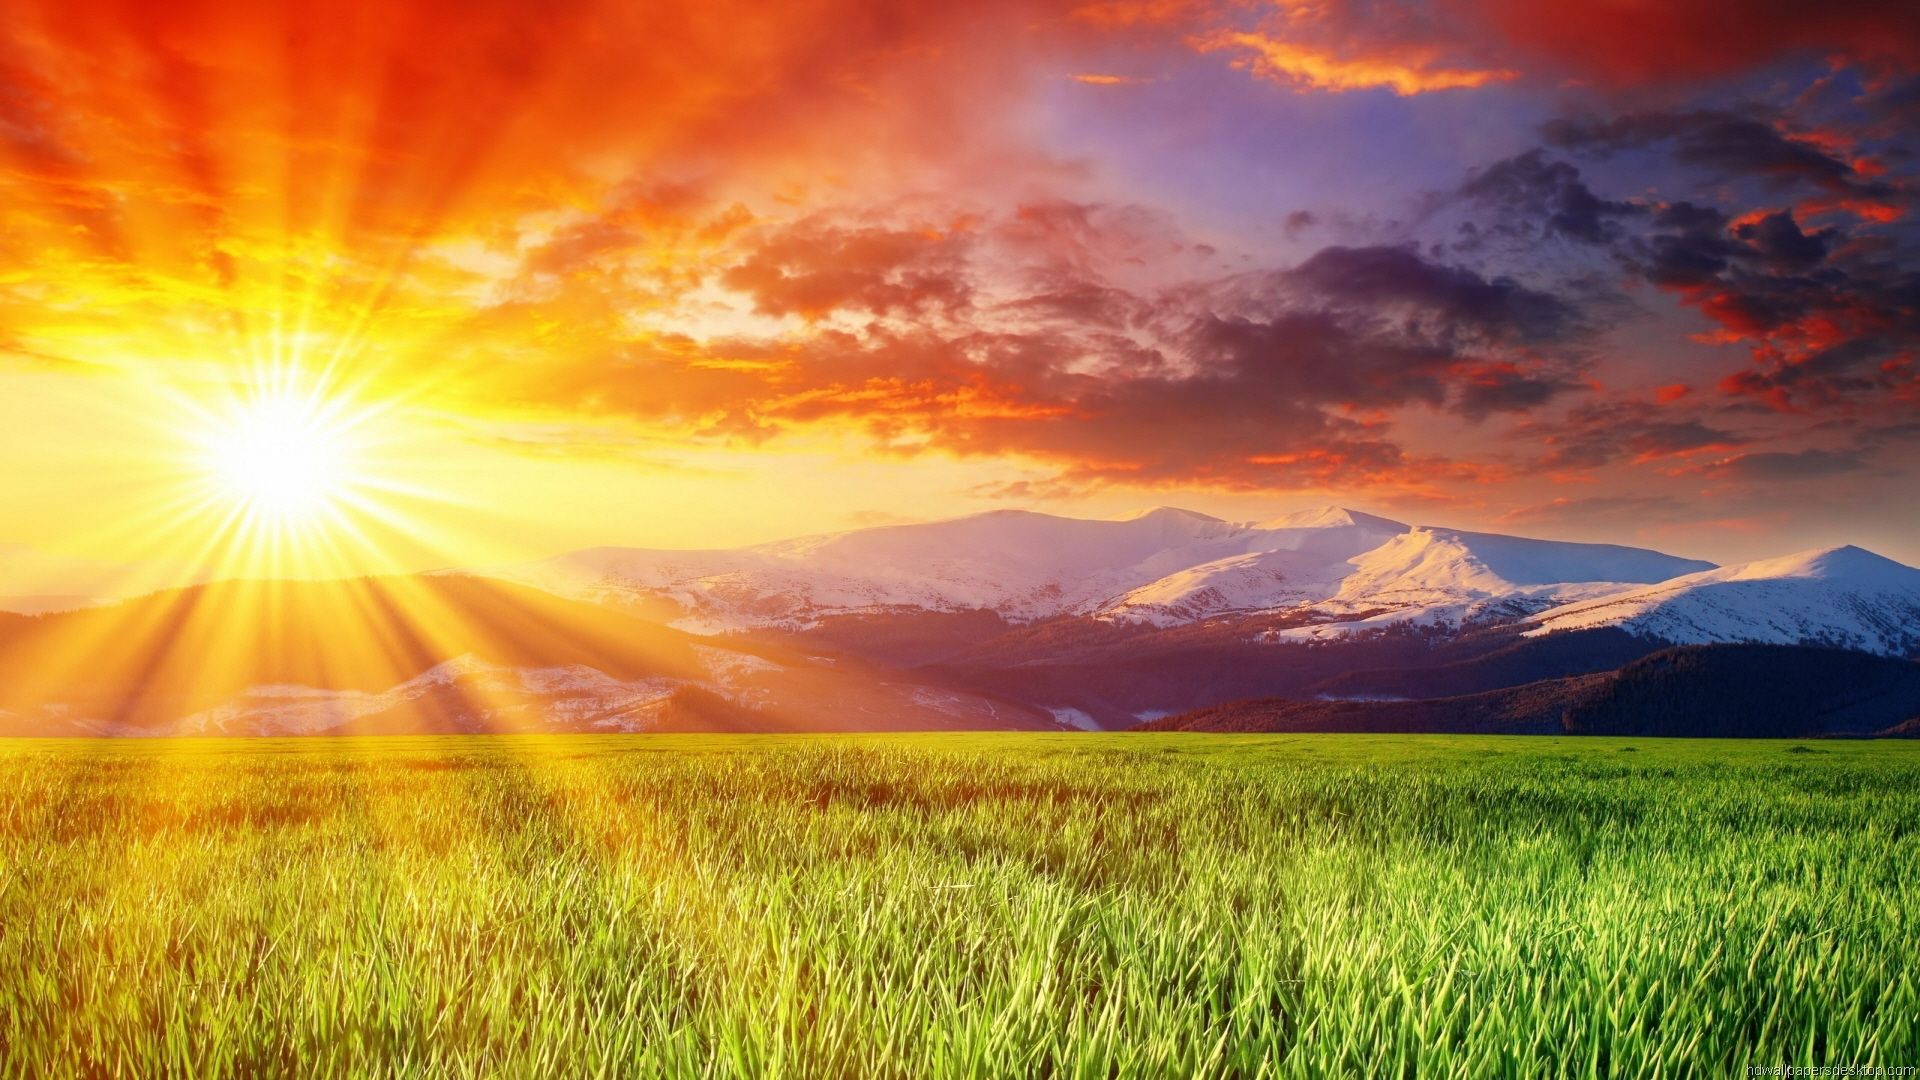 Sun full hd, hdtv, fhd, 1080p wallpapers hd, desktop backgrounds 1920x1080,  images and pictures